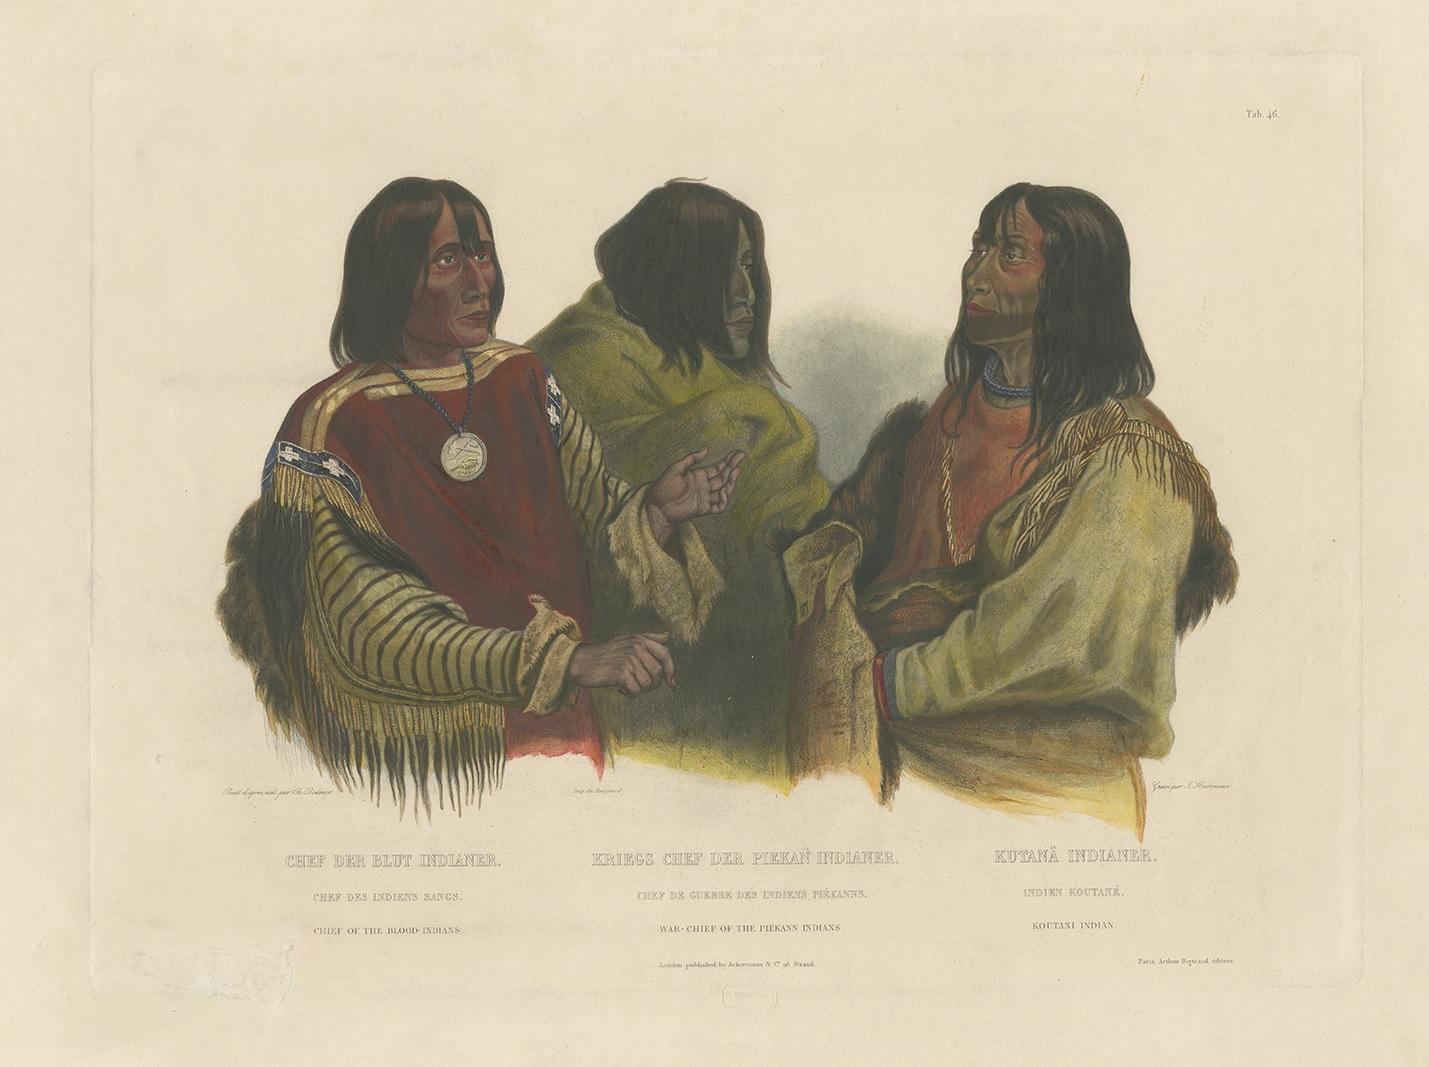 Antique print titled 'Chef der Blut Indianer - Kriegs Chef er Pekan Indianer - Kutanä Indianer'. Aquatint engraving by Hürlimann after Bodmer. It shows two Blackfoot chiefs and a Kutenai (Kootenay or Kootenai) leader who lived amongst the Blackfoot.